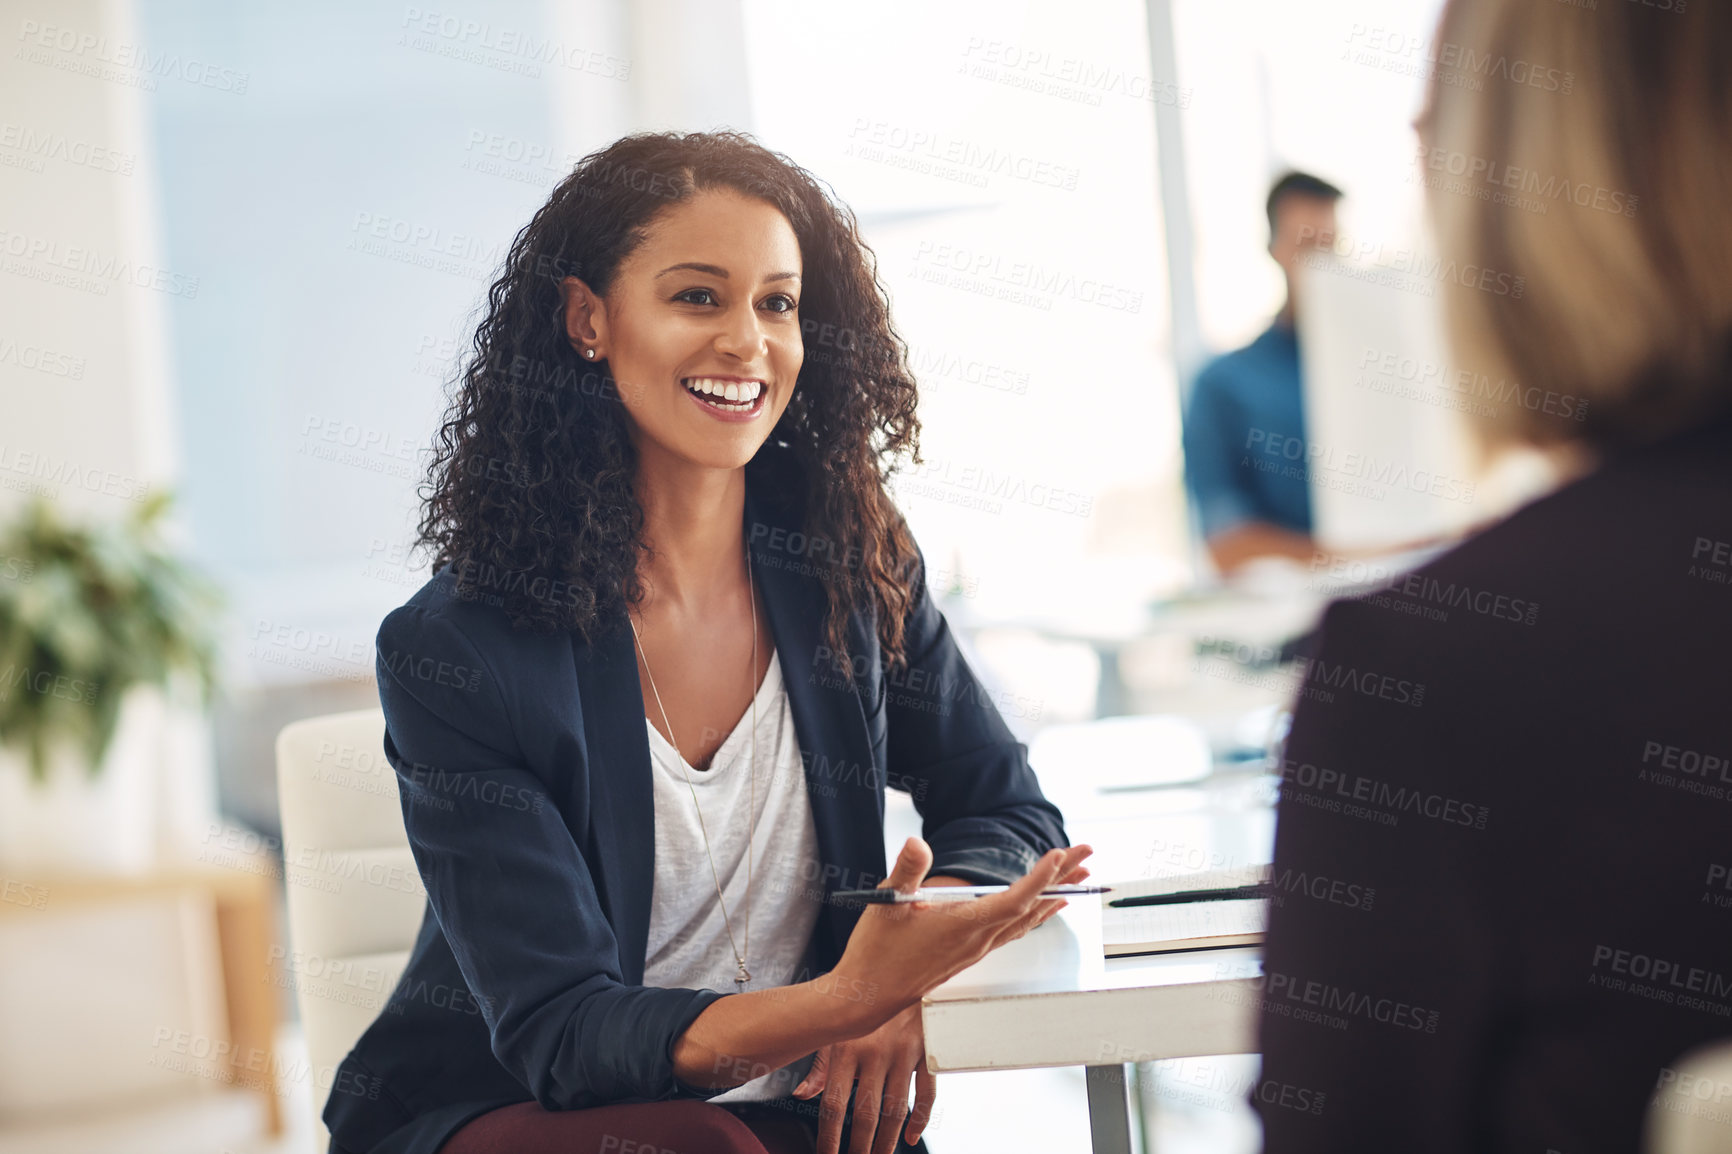 Buy stock photo Shot of two young women having a conversation in a modern office